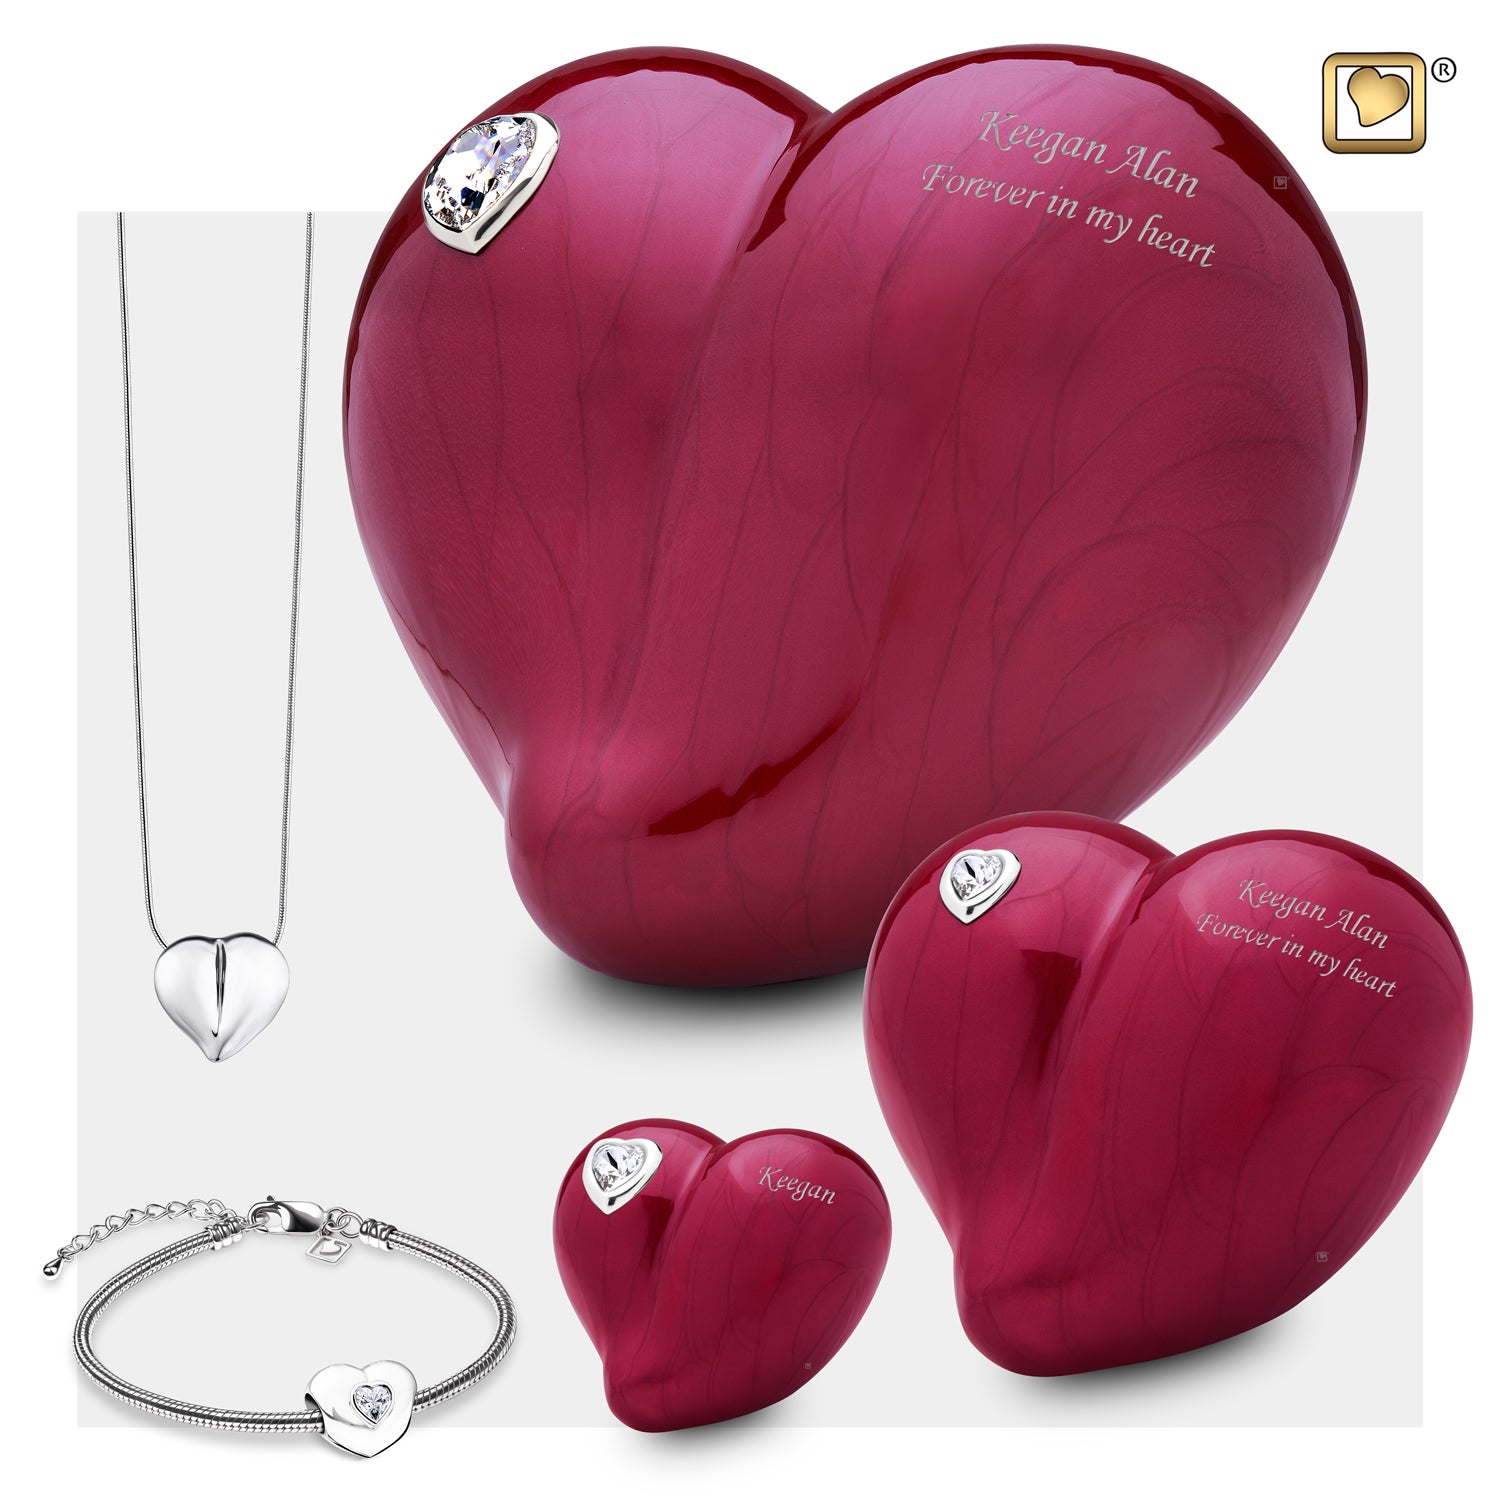 Adult LoveHeart Shaped Pink Cremation Urn